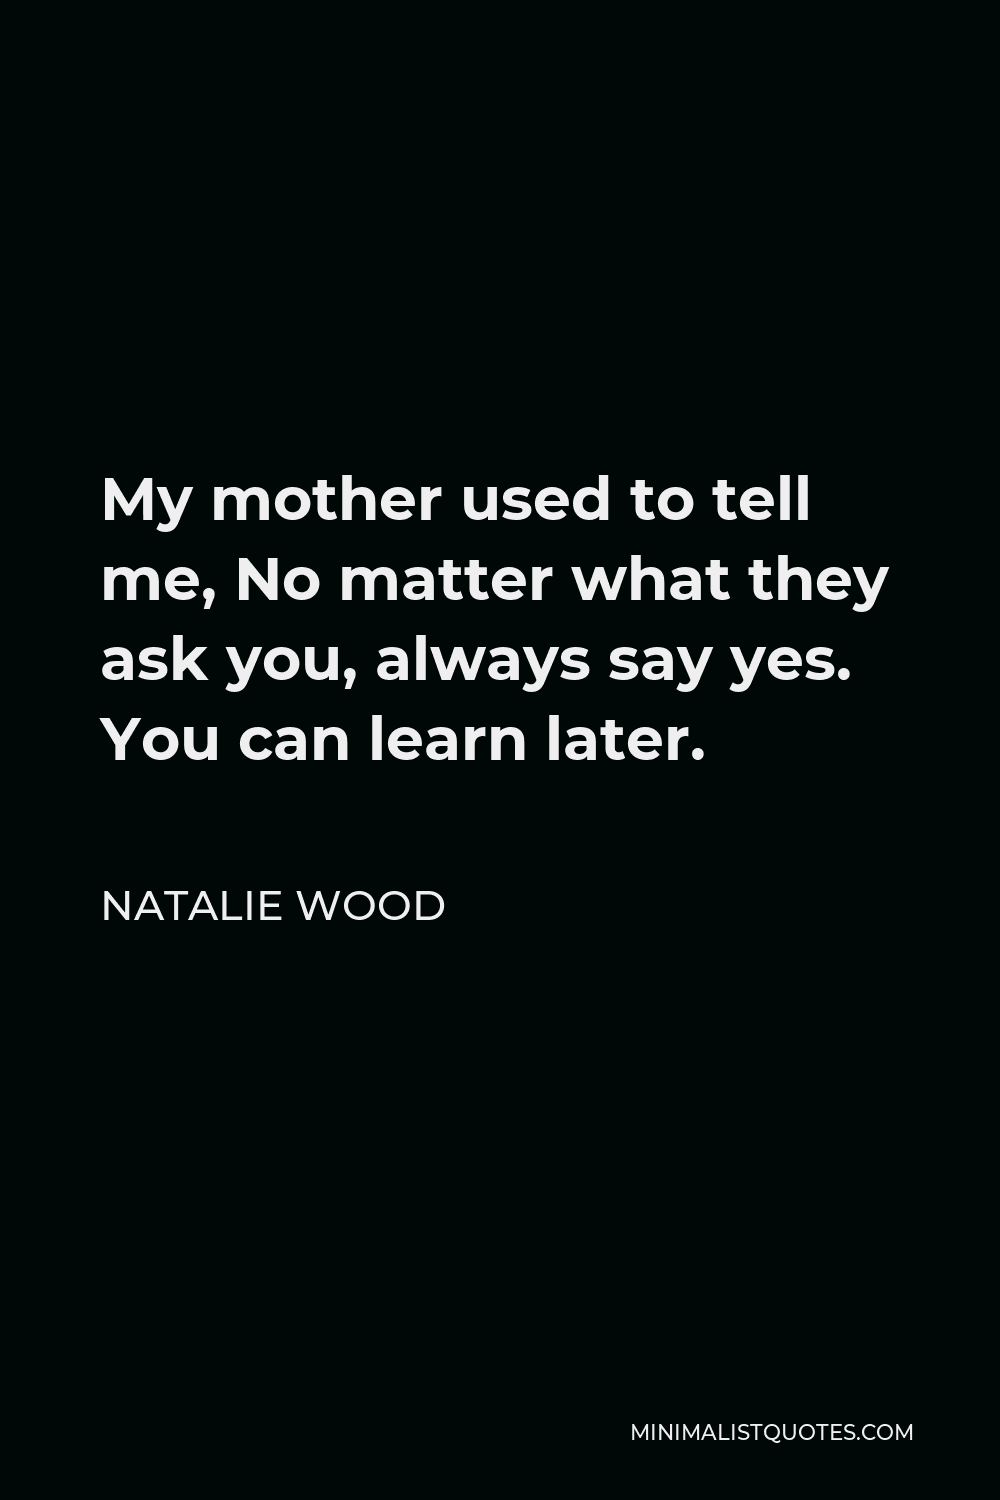 Natalie Wood Quote My Mother Used To Tell Me No Matter What They Ask You Always Say Yes You